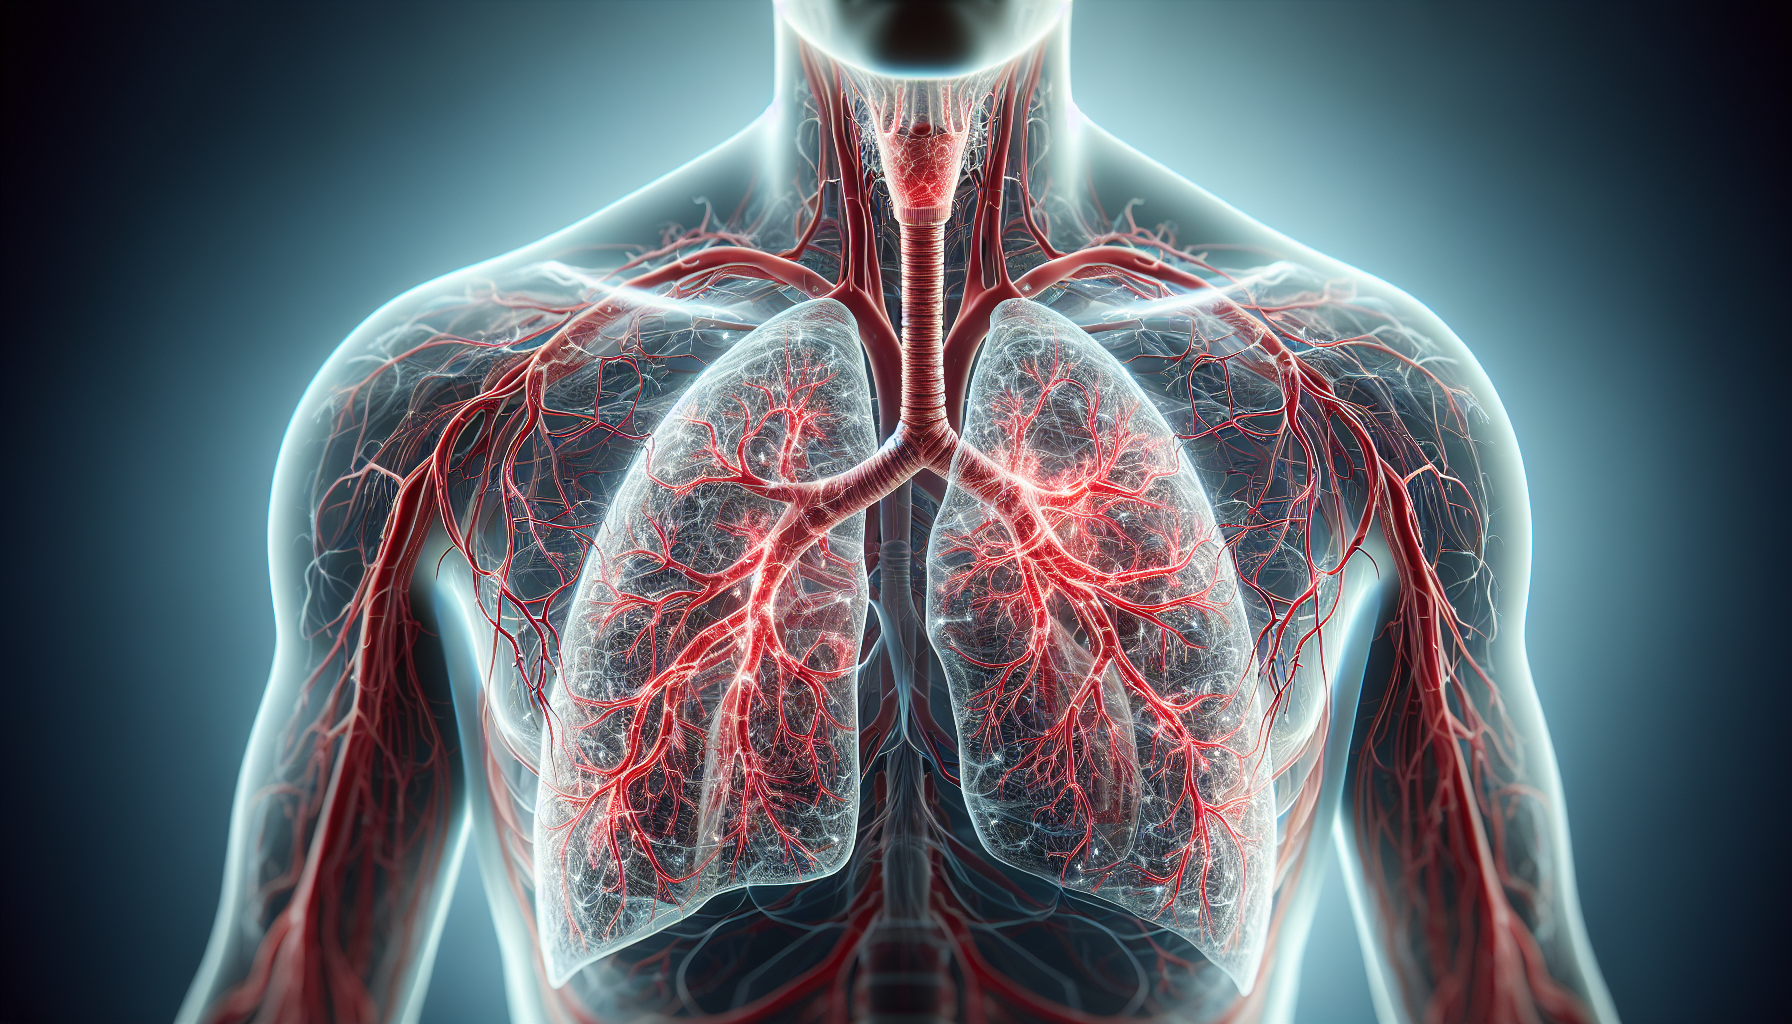 How Does Hypertension Affect The Respiratory System?